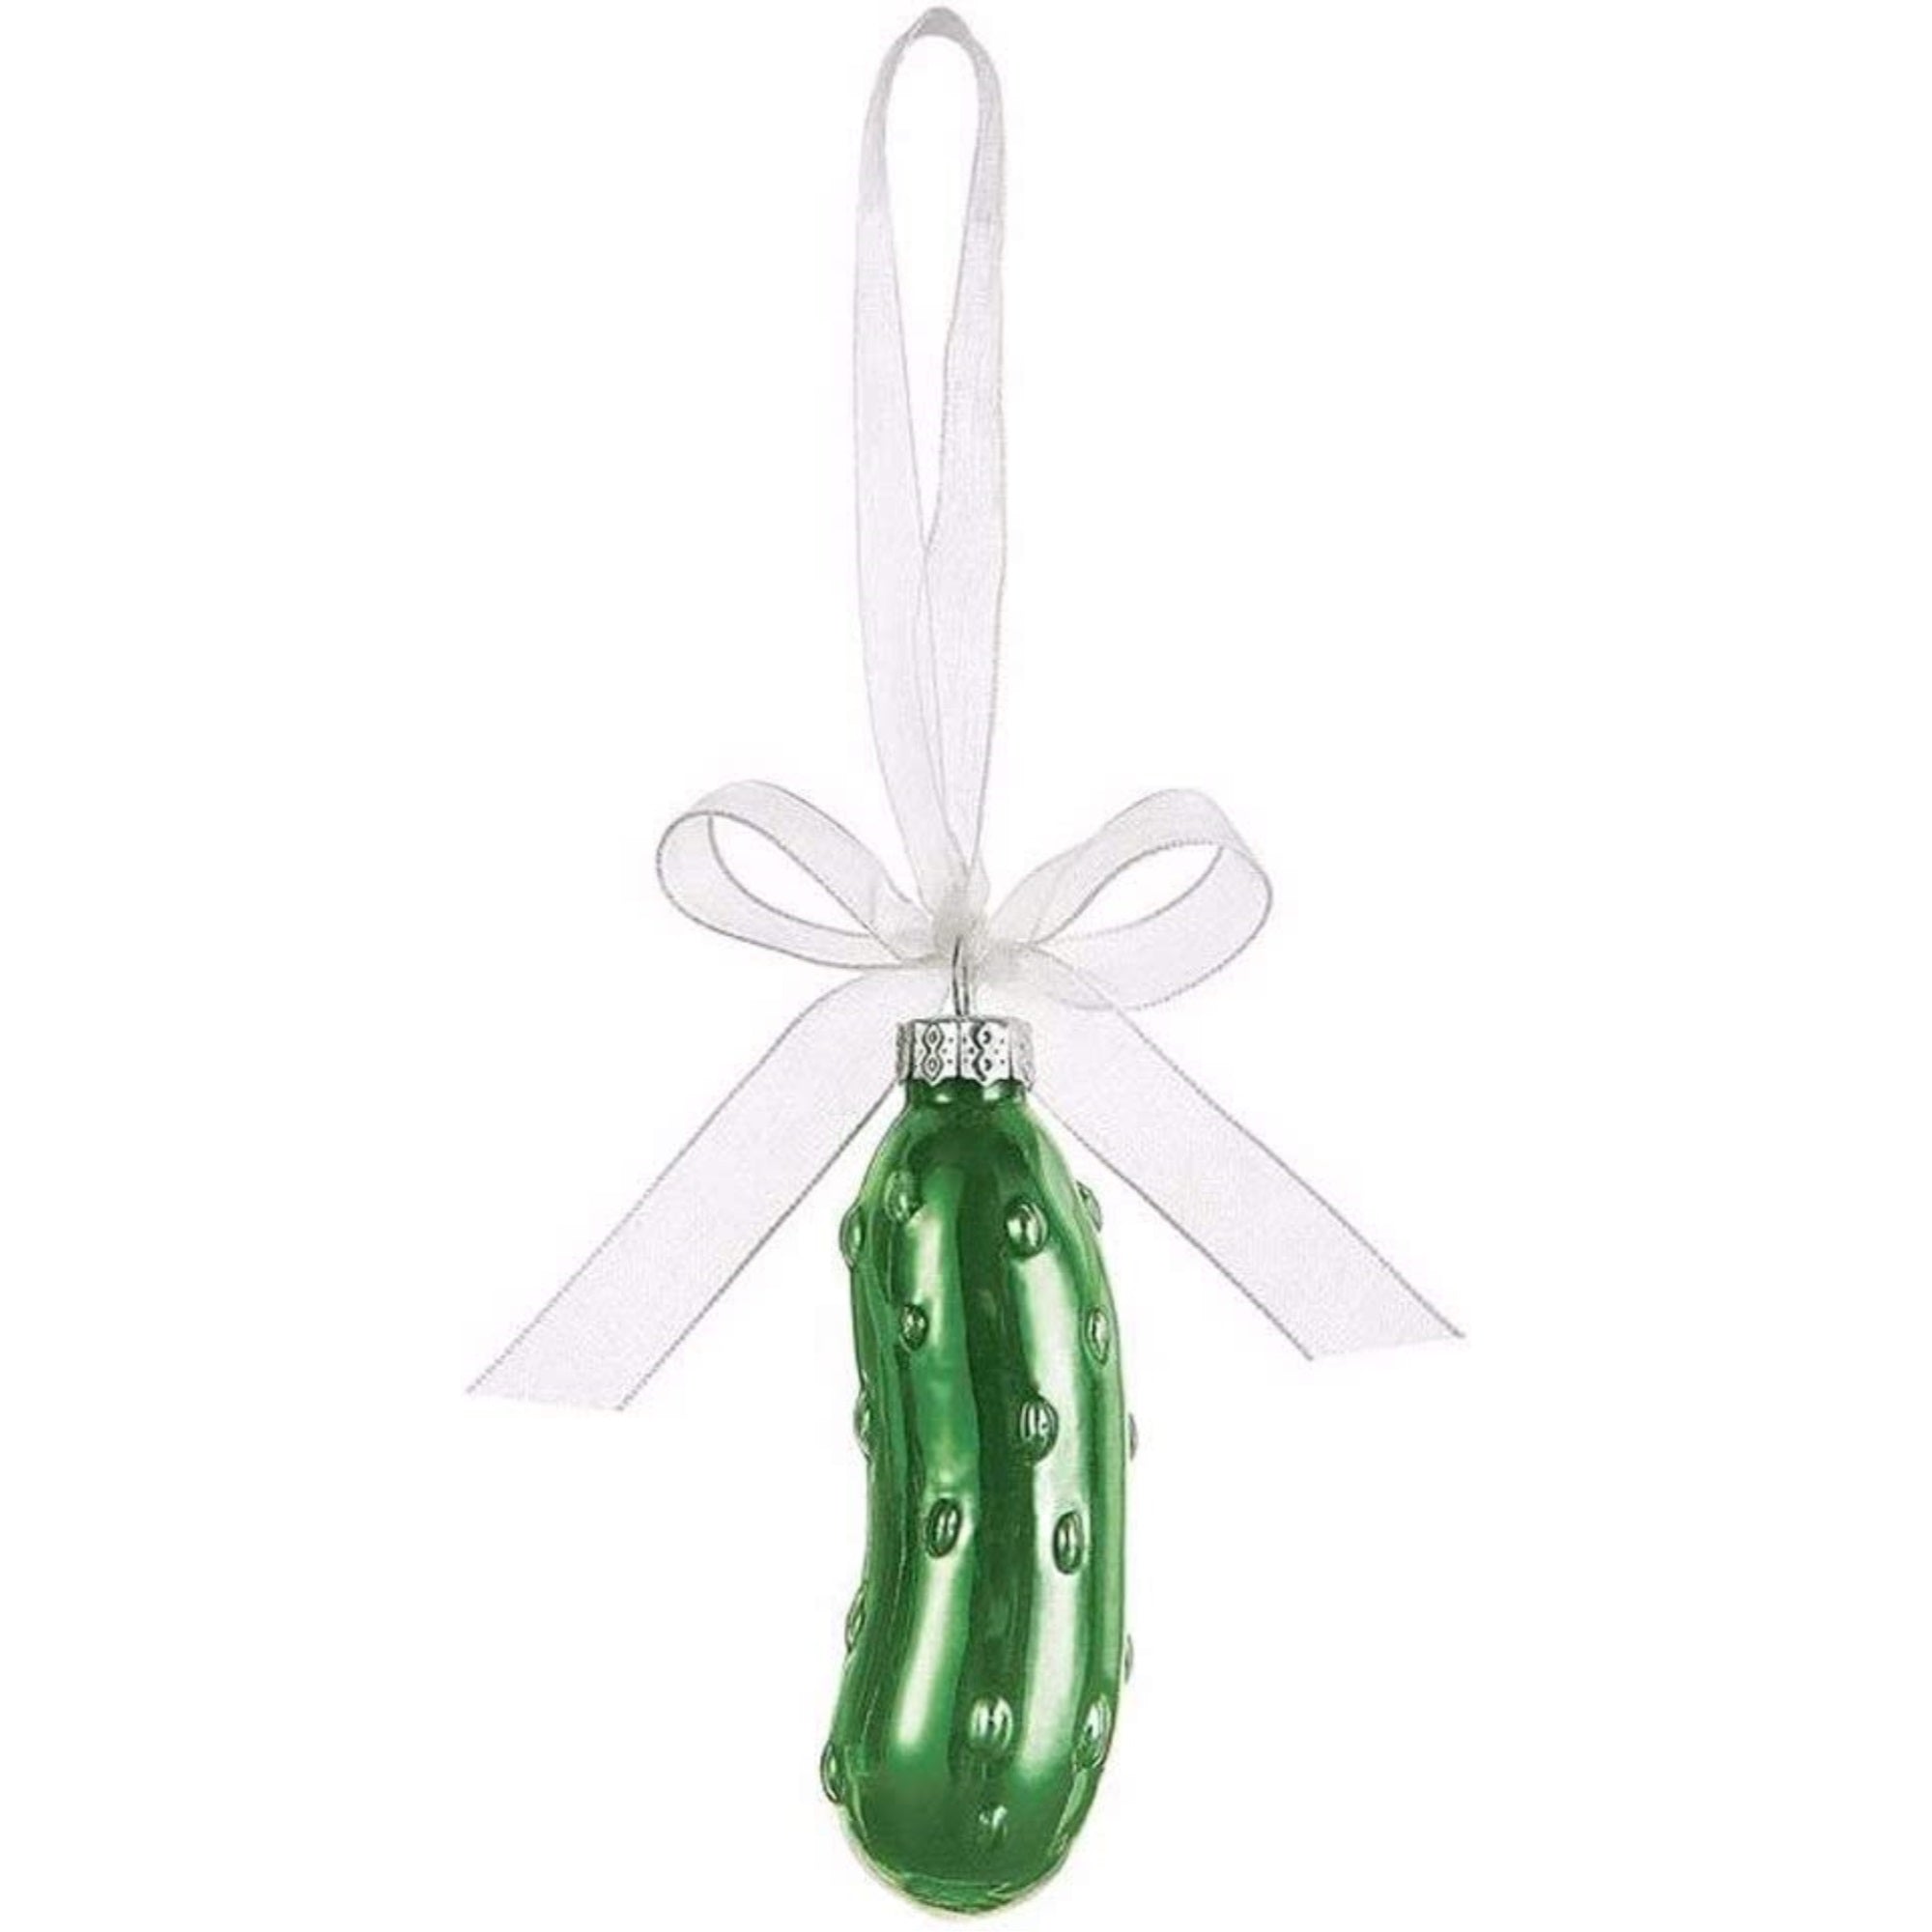 Ganz Glass Christmas Pickle Ornament In a Gift Box, Green